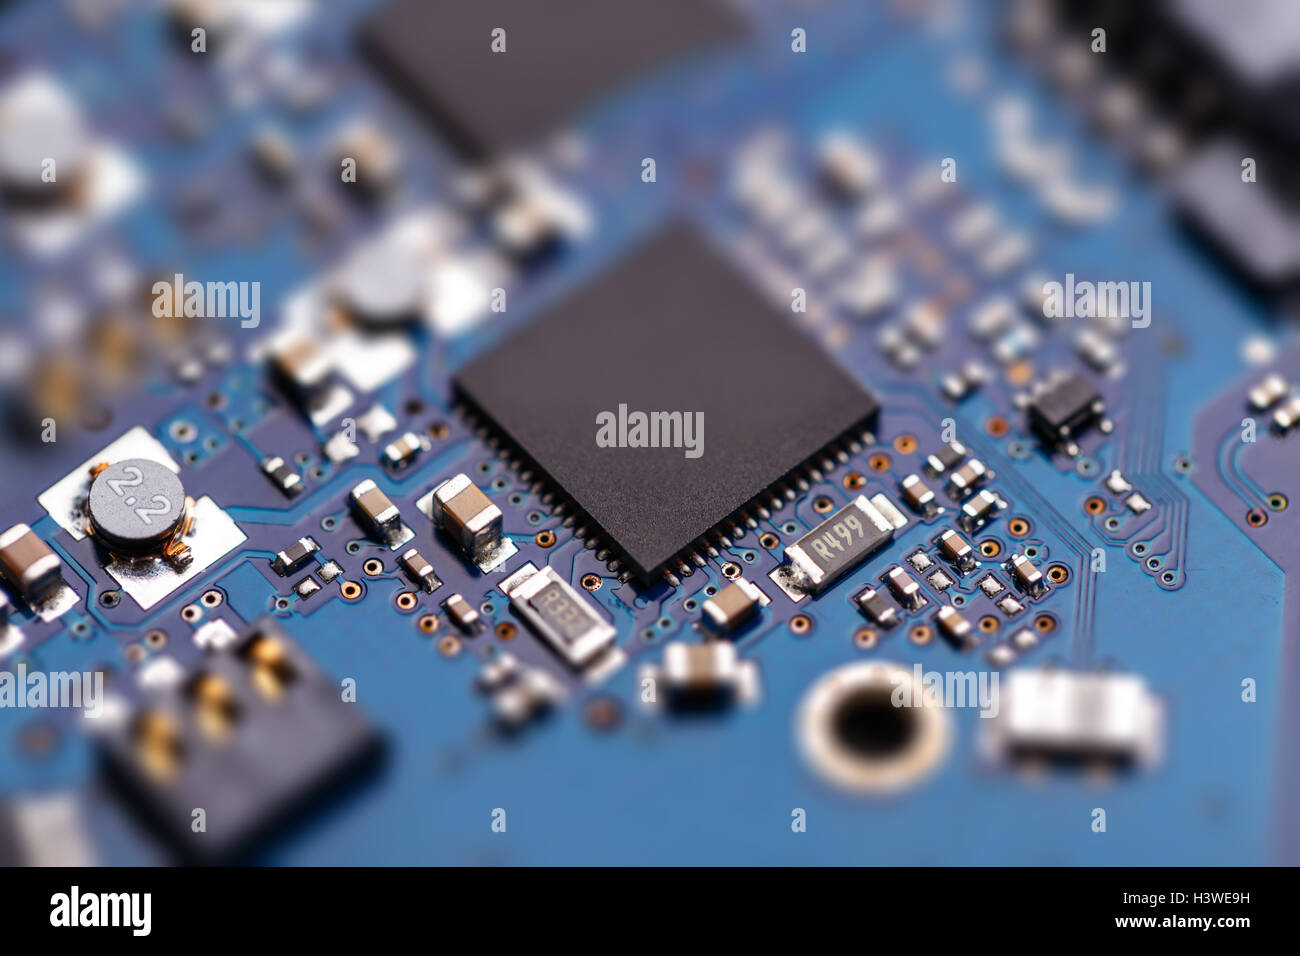 Integrated semiconductor microchip/ microprocessor on blue circuit board Stock Photo